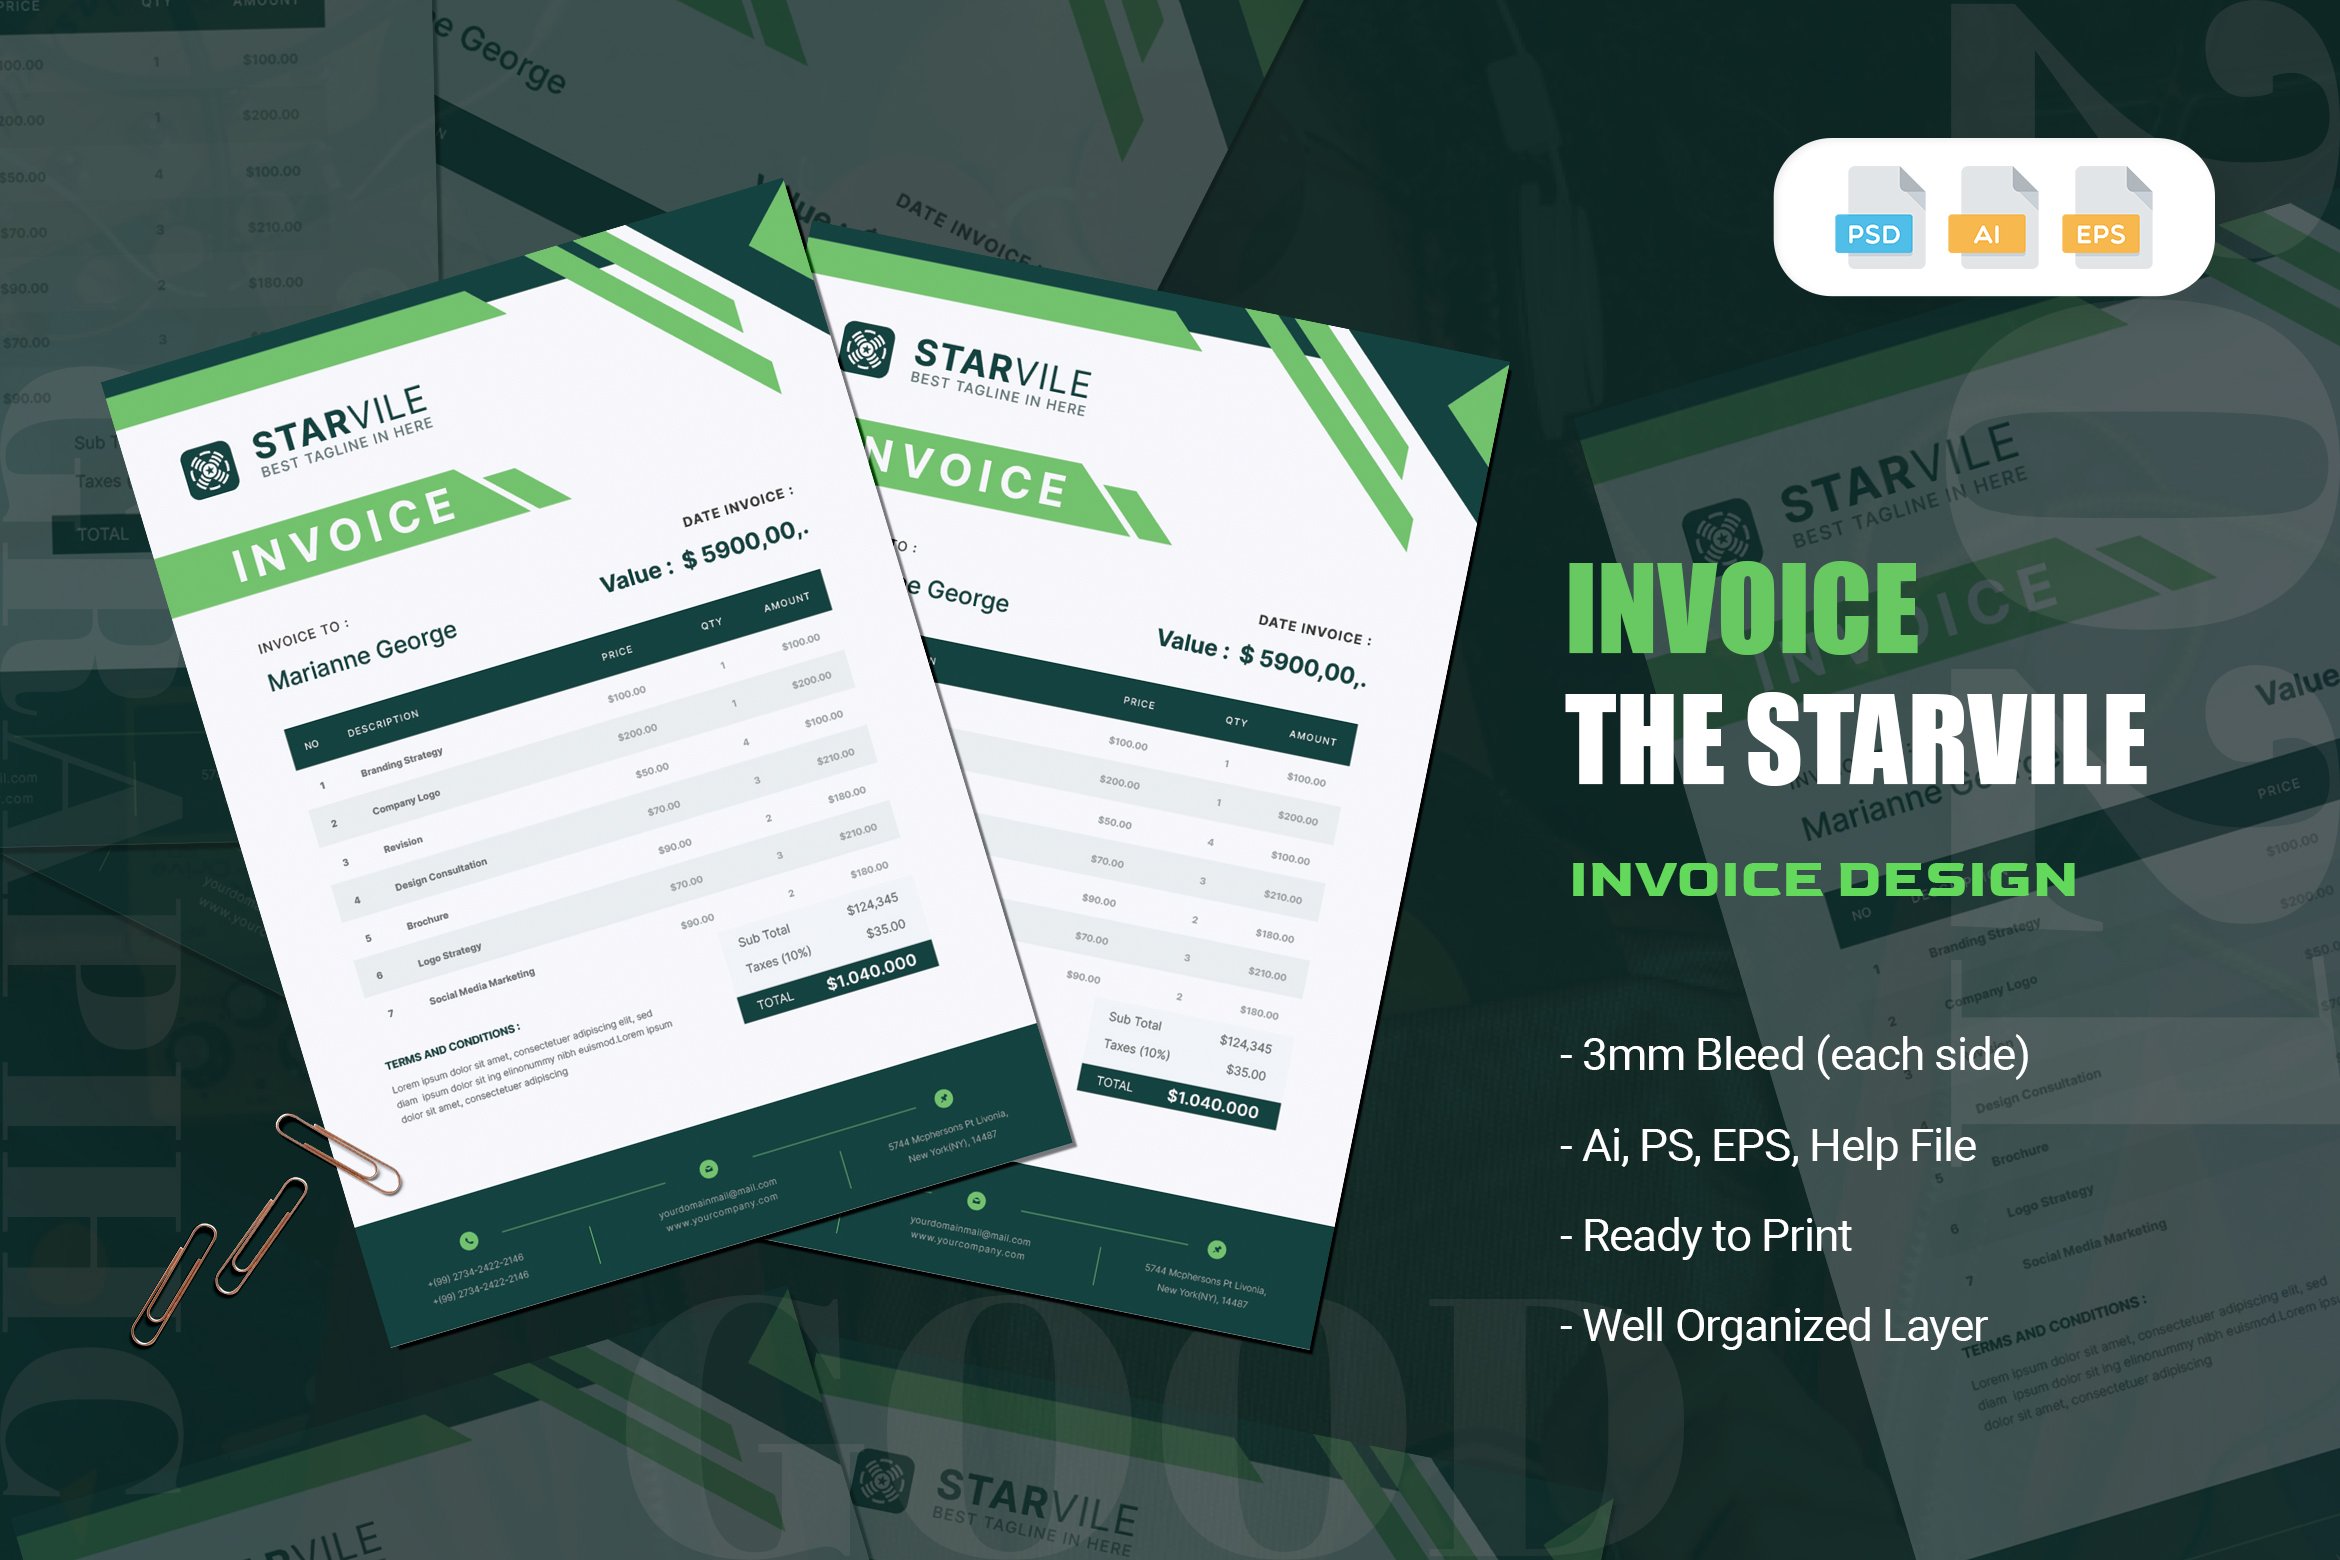 Starvile Invoice cover image.